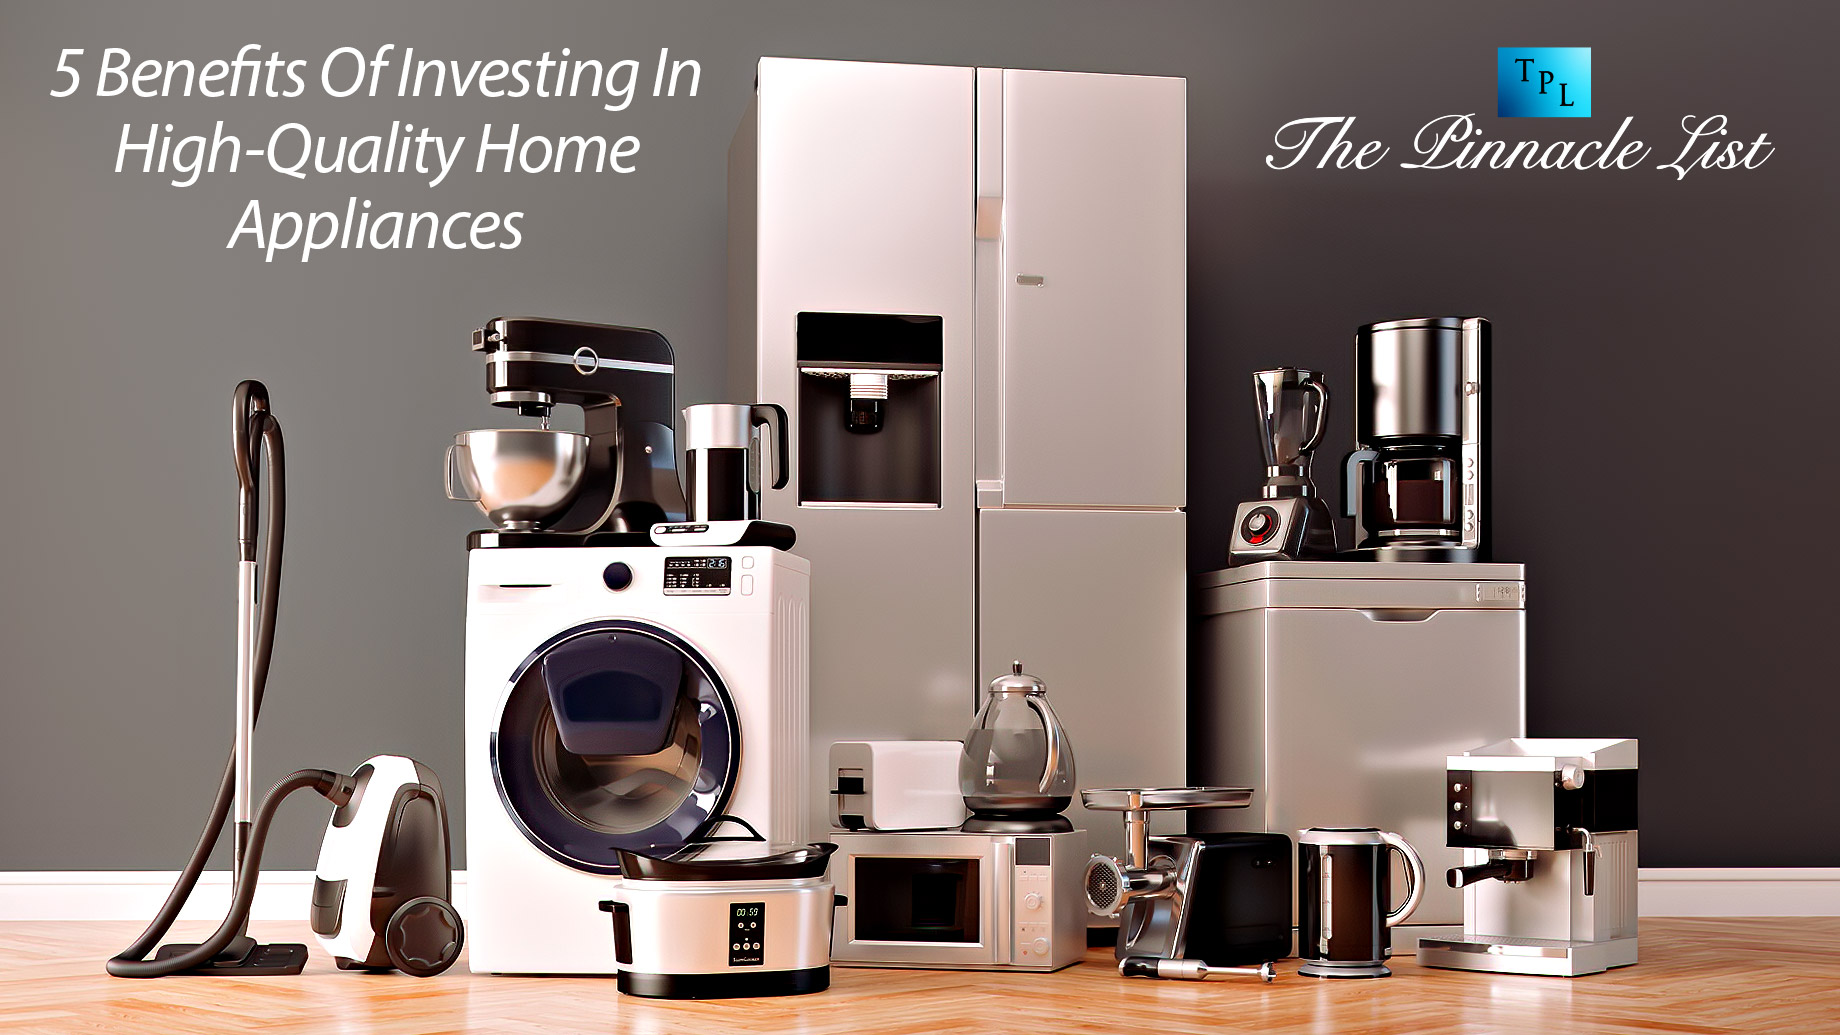 5 Benefits Of Investing In High-Quality Home Appliances